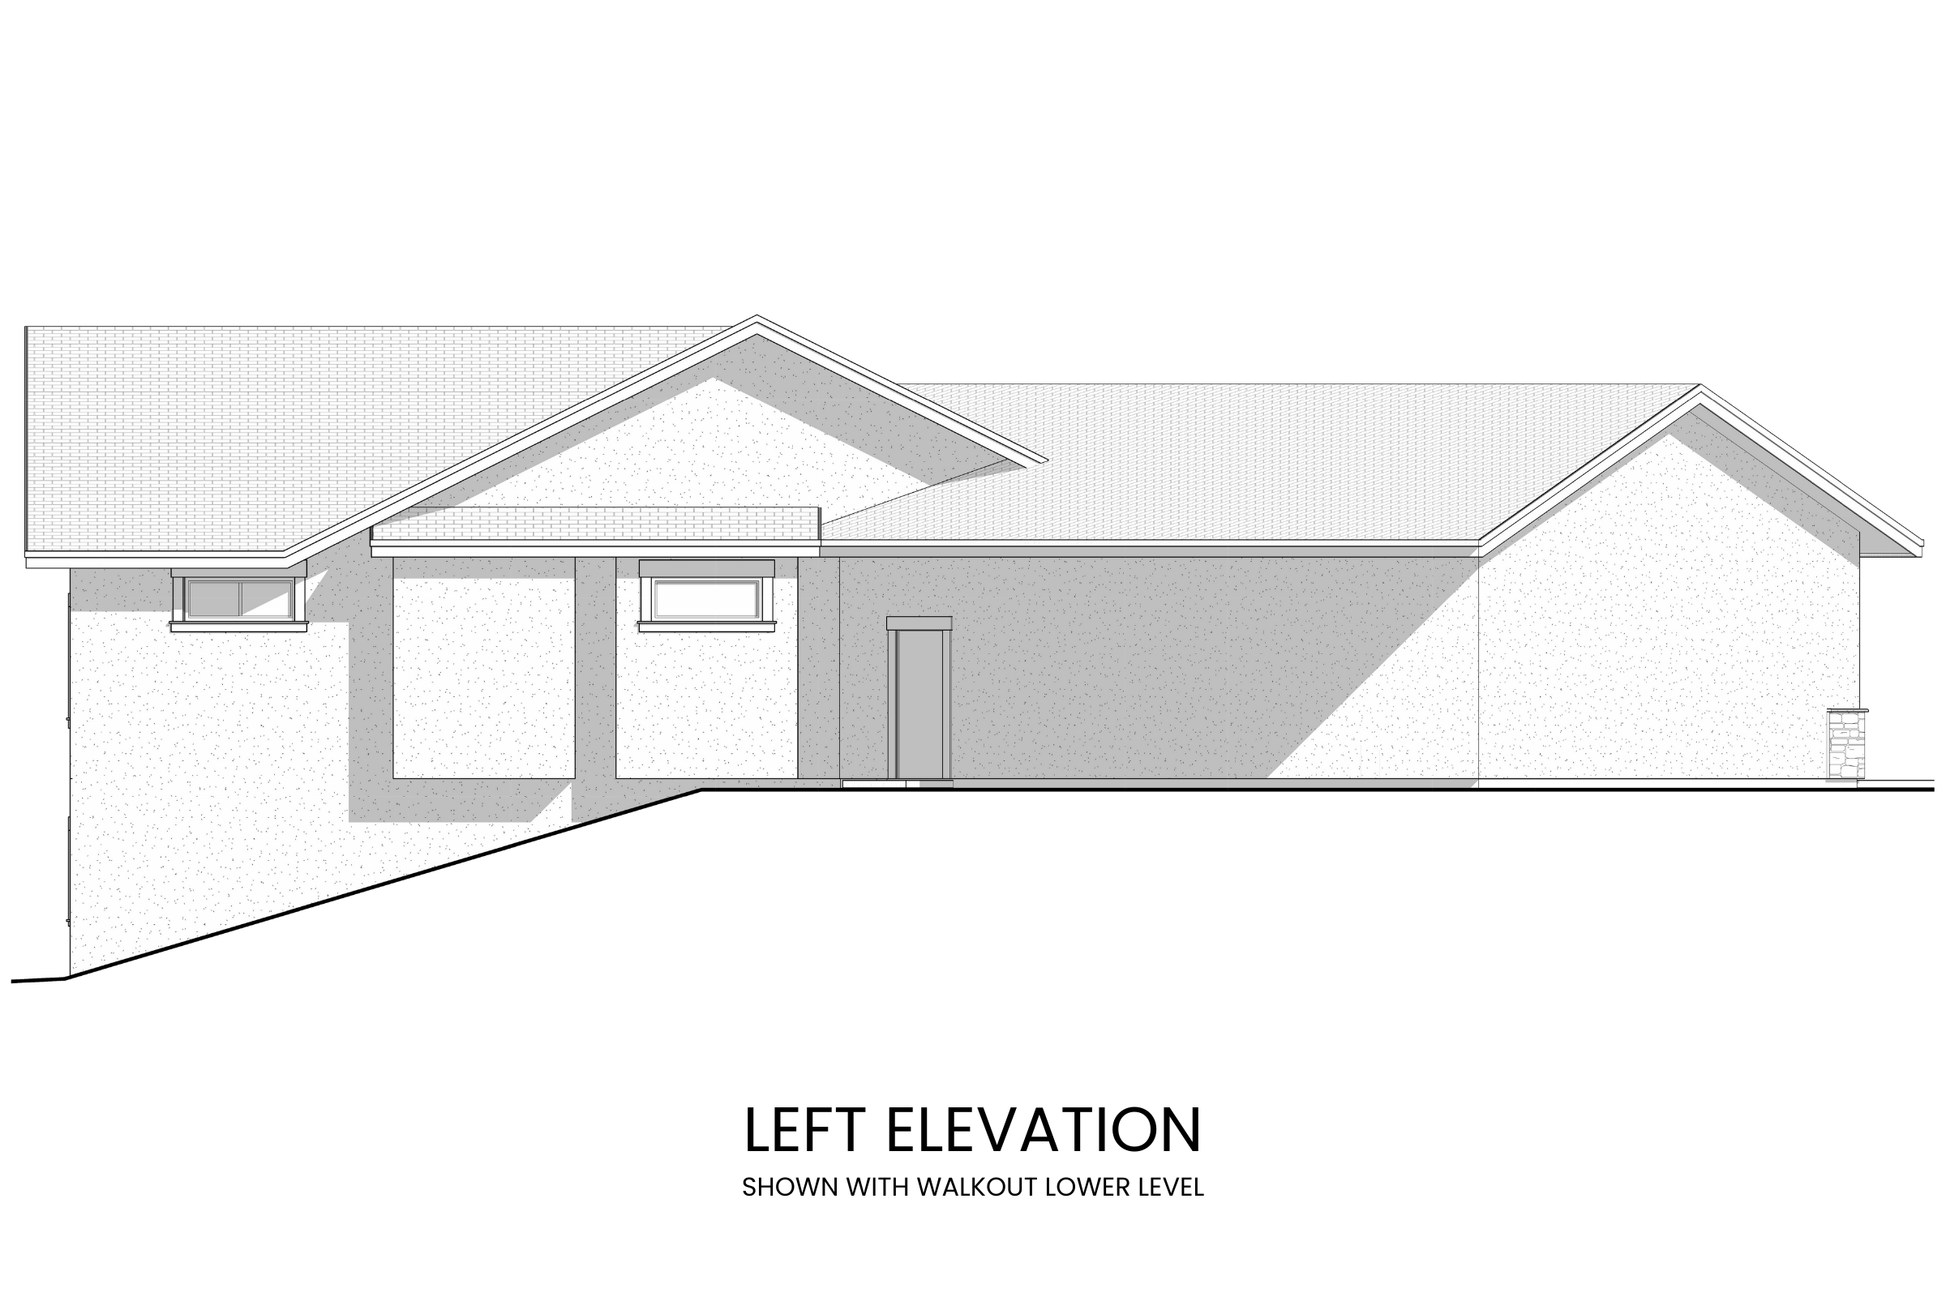 Three-Bedroom-Open-Floor-Plan-with-Lower-Level-Expansion-Left-Elevation-Rocky-Mountain-Plan-Company-Dudley-Lake